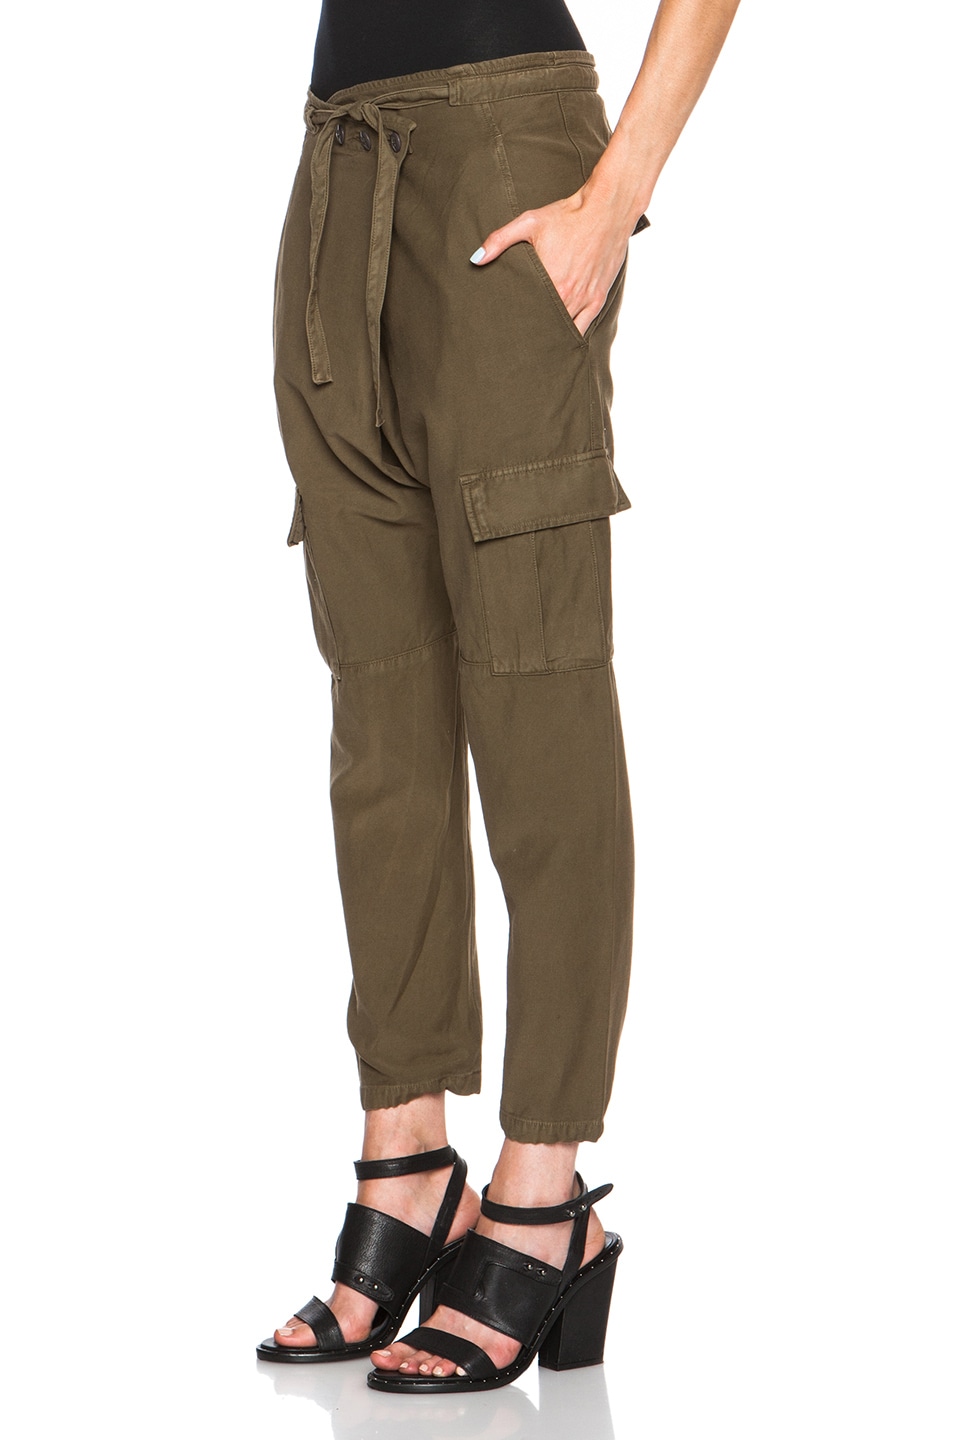 Citizens of Humanity Casbah Cargo Pants in Vintage Fatigue | FWRD